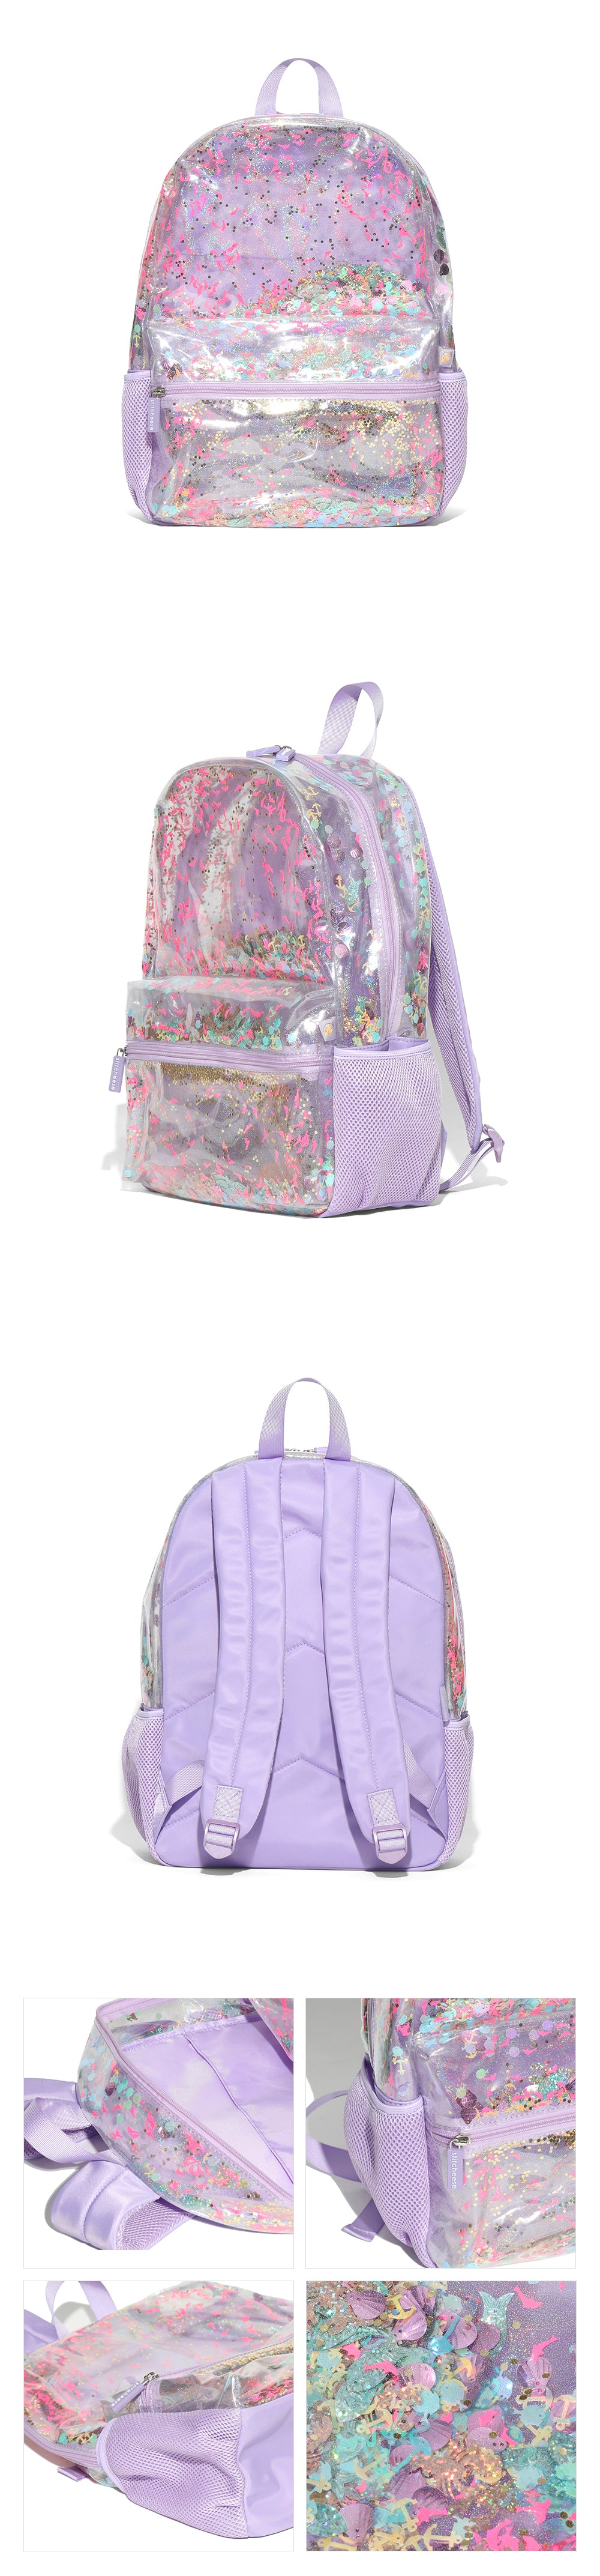 Stitcheese Double Twinkle Backpack Plus (Lavender)